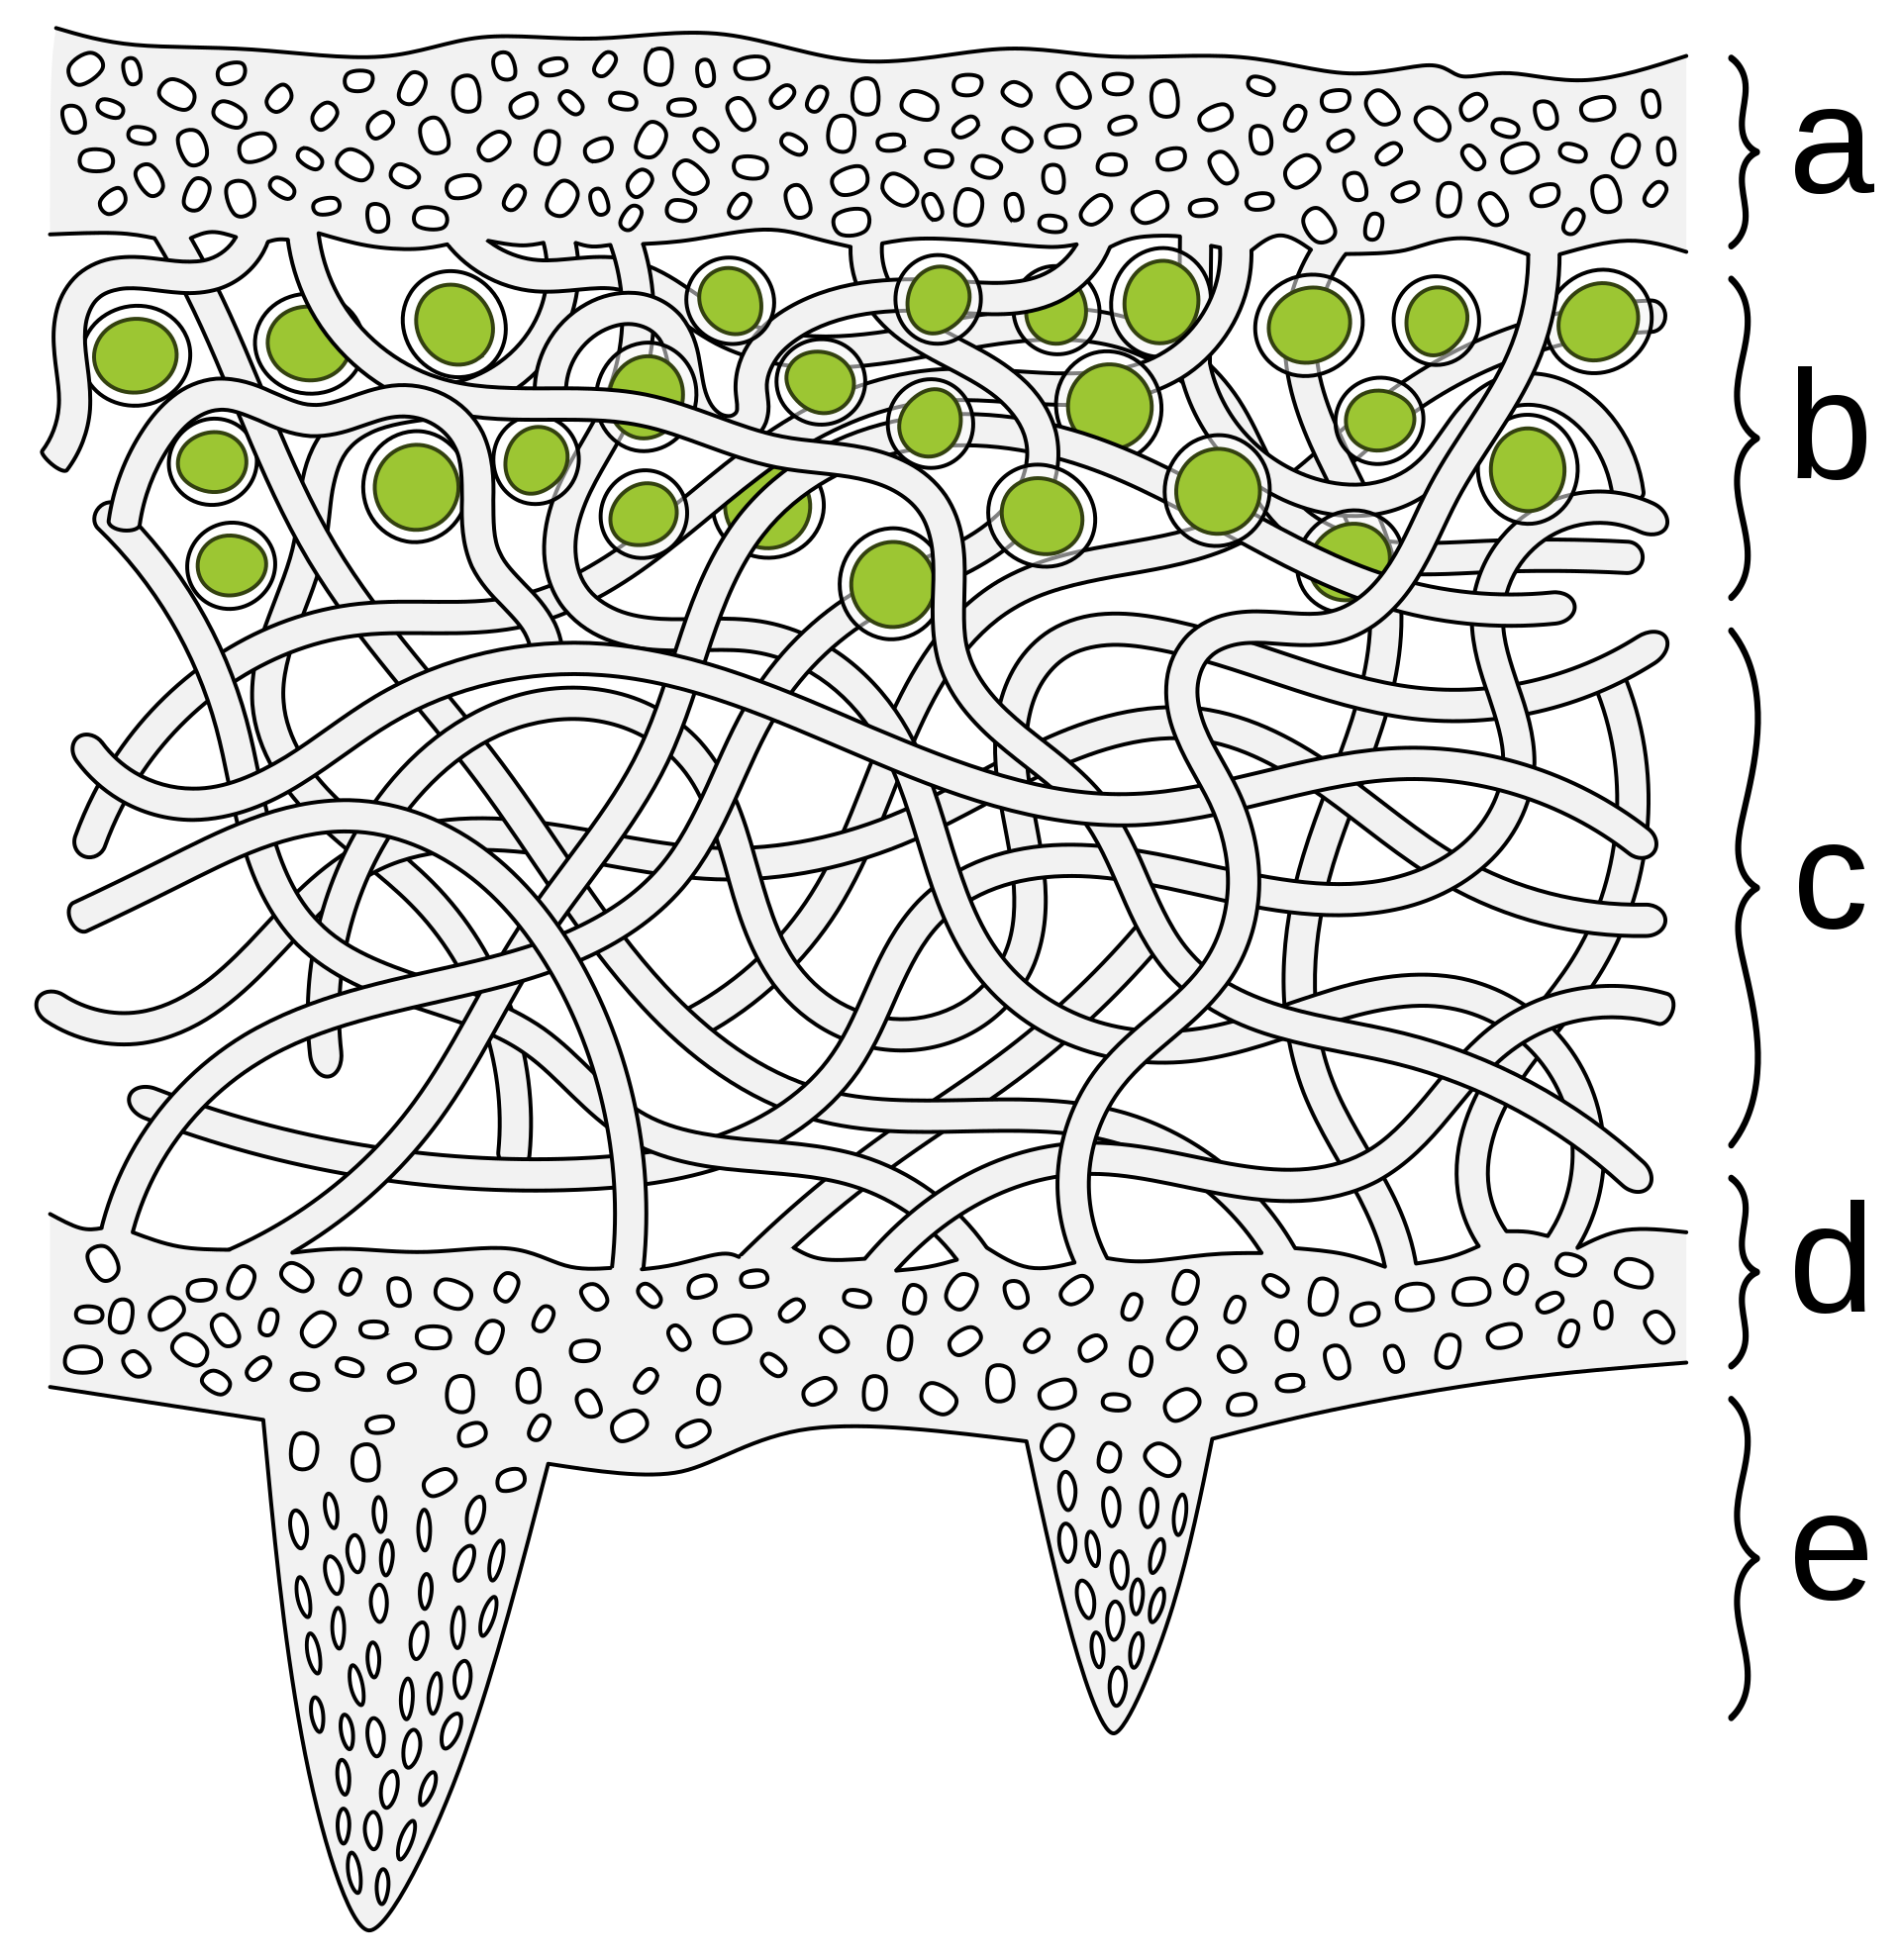 A cross section through a lichen thallus. The layers, a-e, are shown in order from the upper surface to the lower surface of the thallus. 